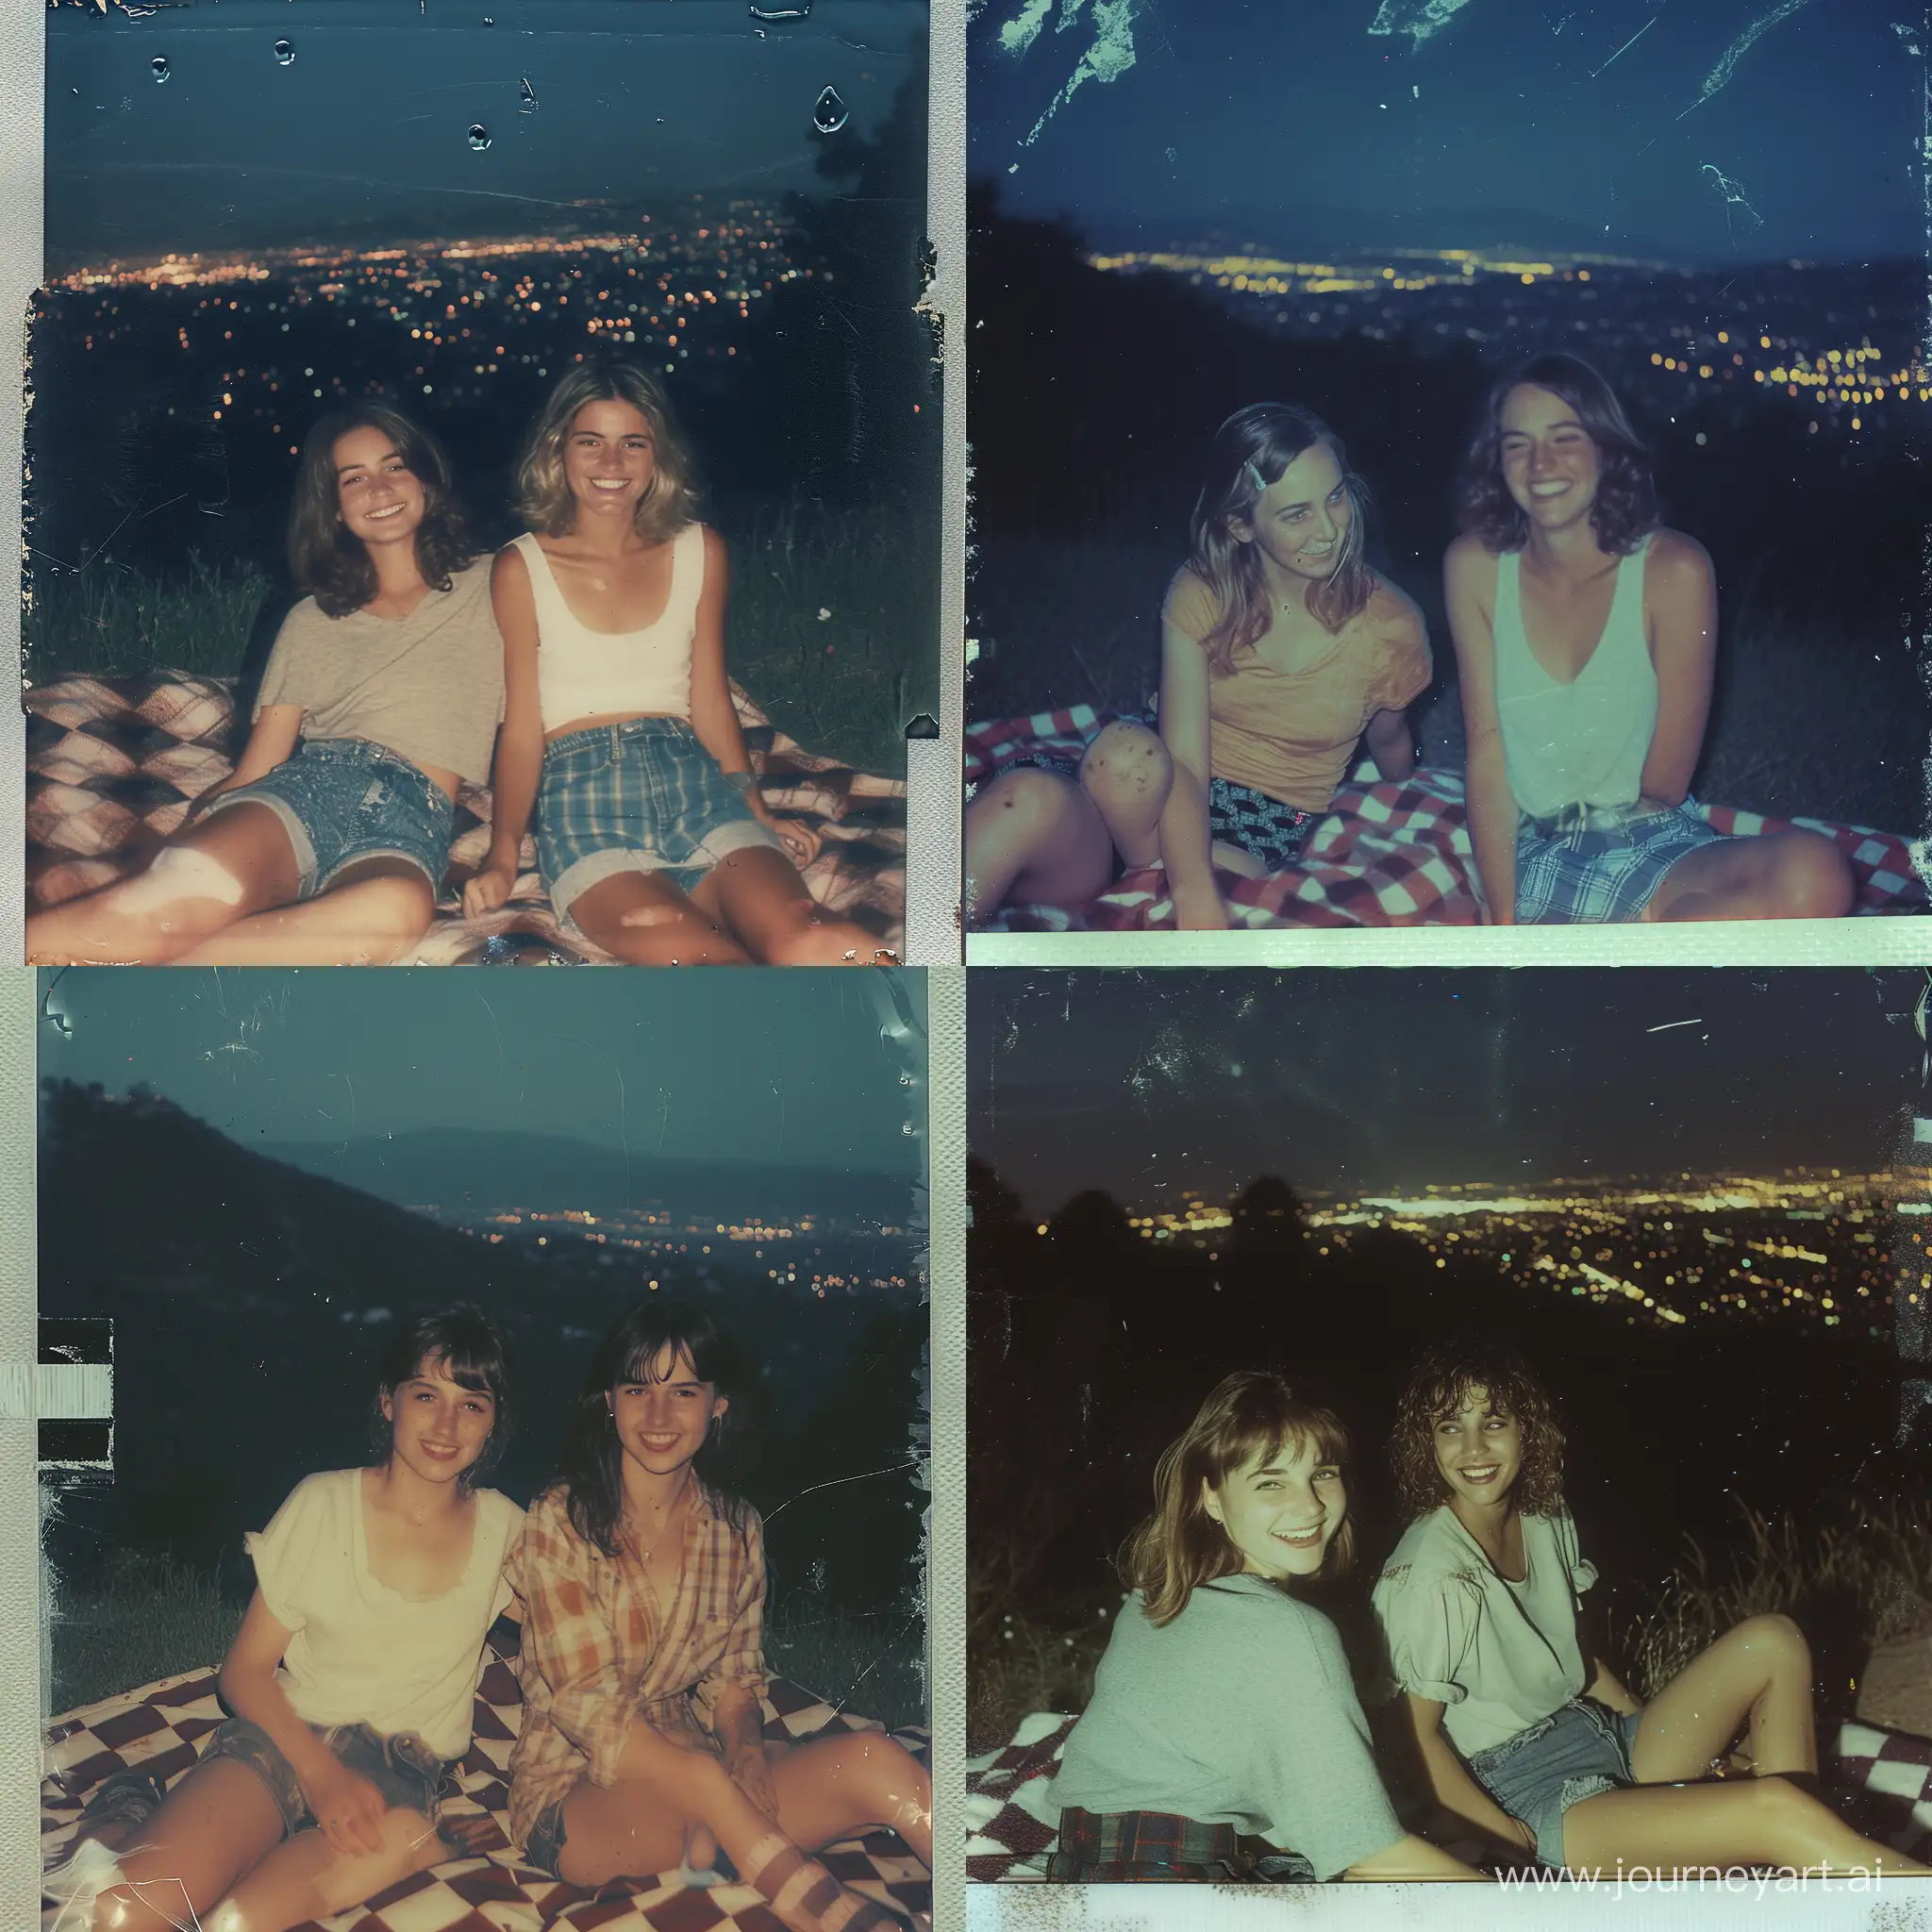 Smiling-Friends-on-Checkered-Blanket-90s-Polaroid-Aesthetic-with-City-Lights